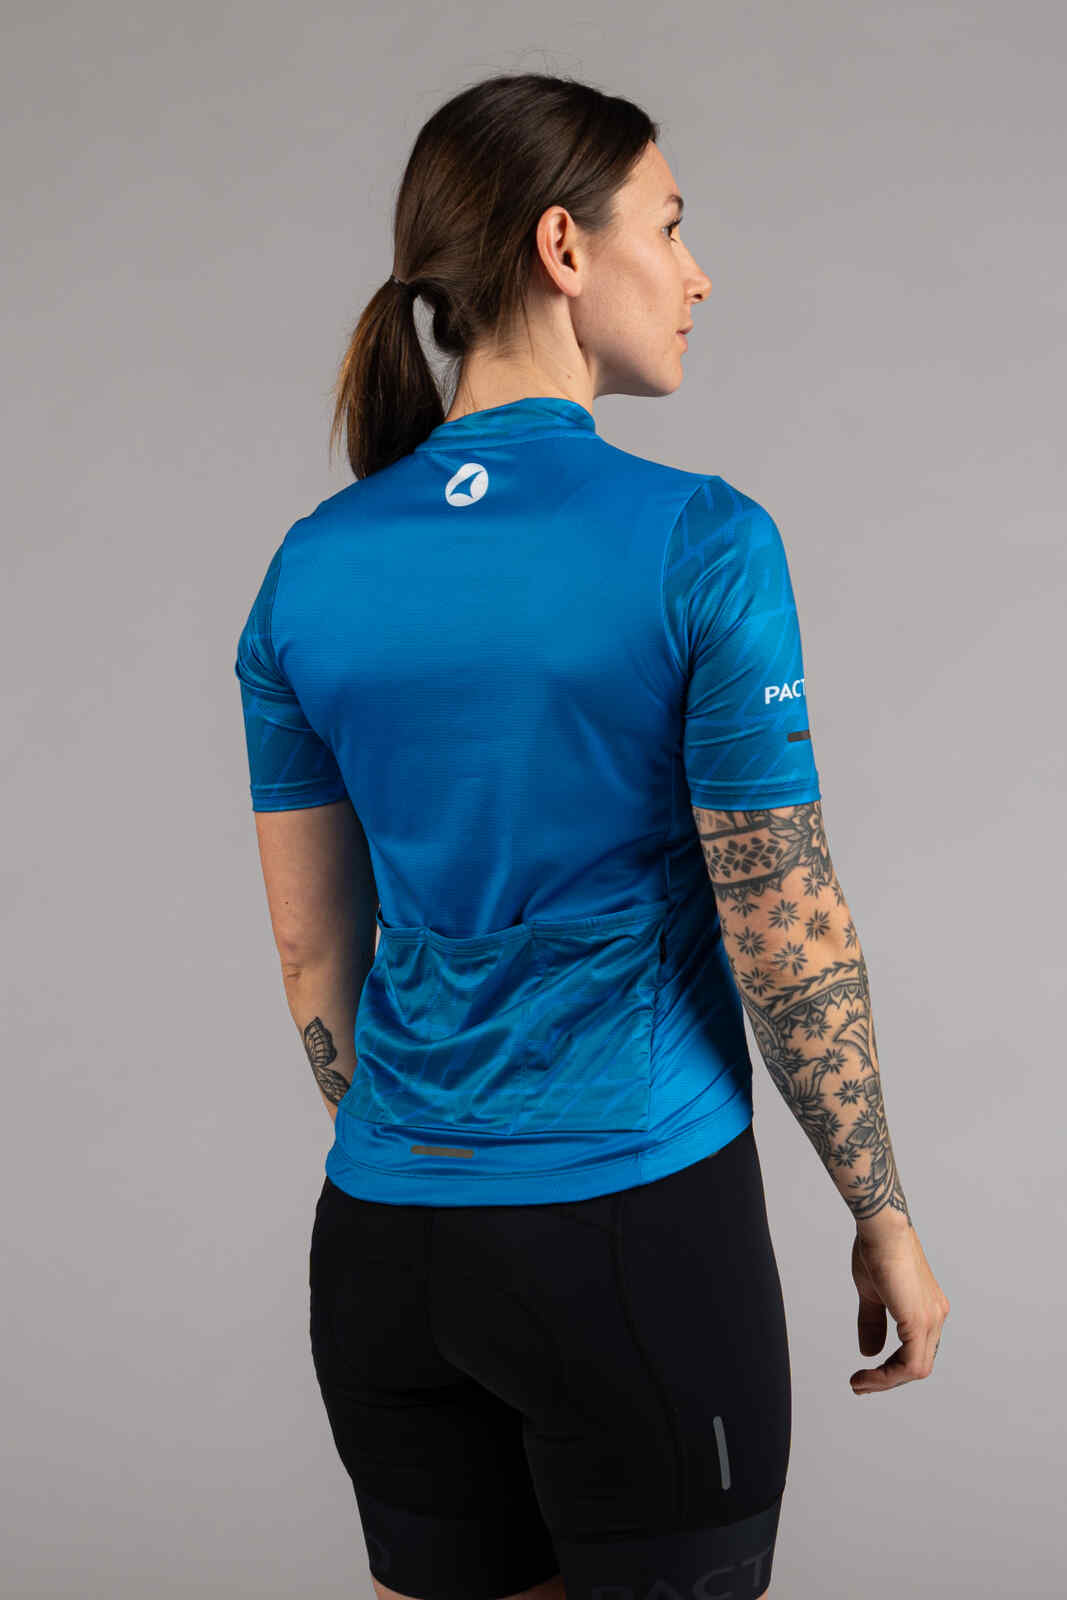 Women's Blue Ascent Cycling Jersey - Back View